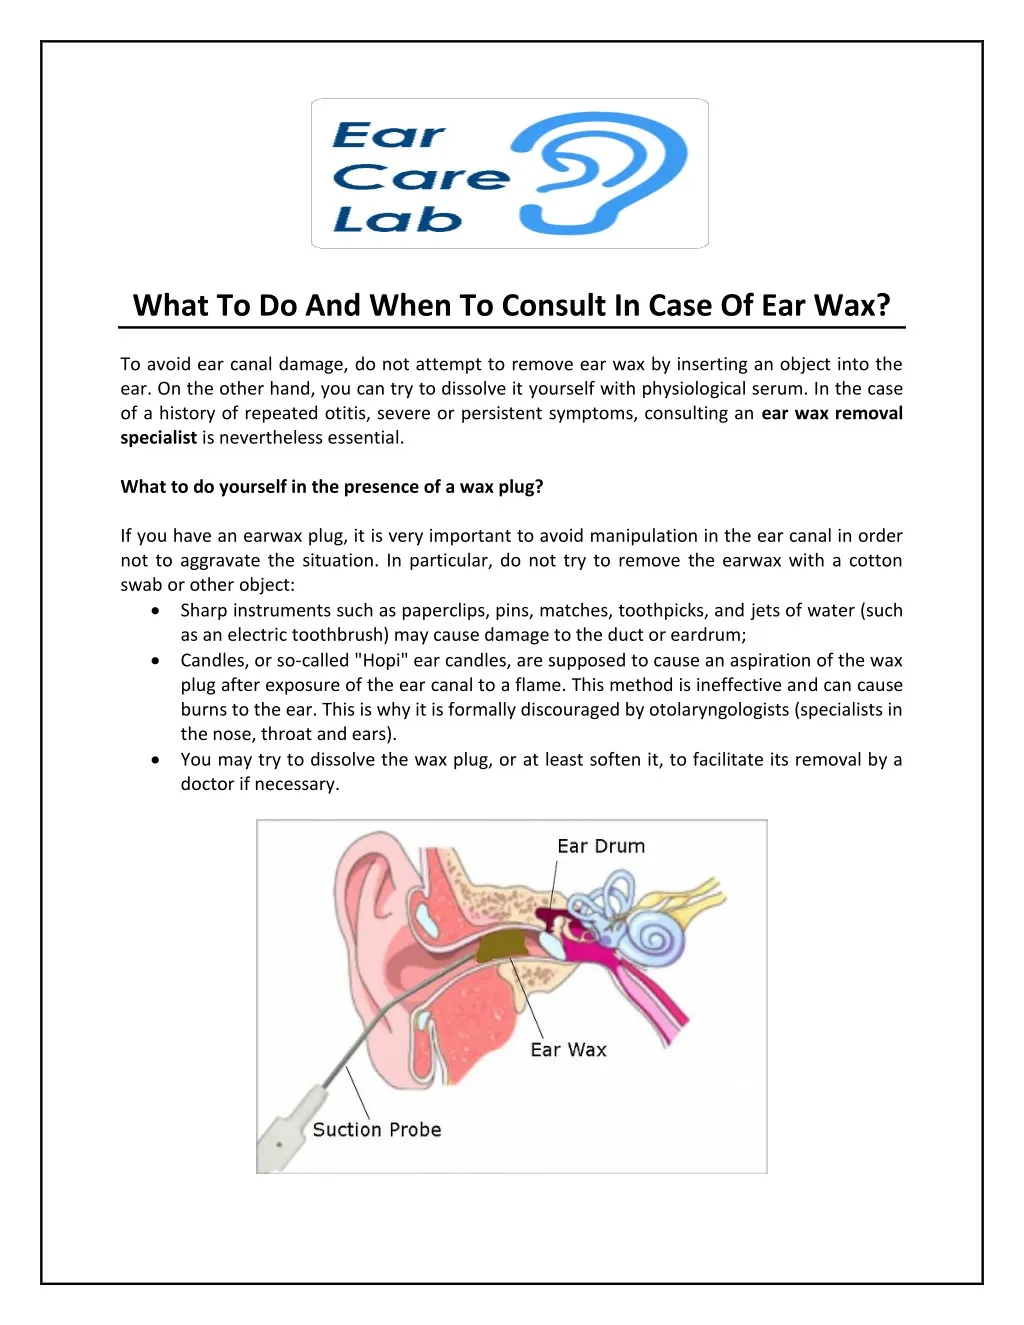 what to do and when to consult in case of ear wax